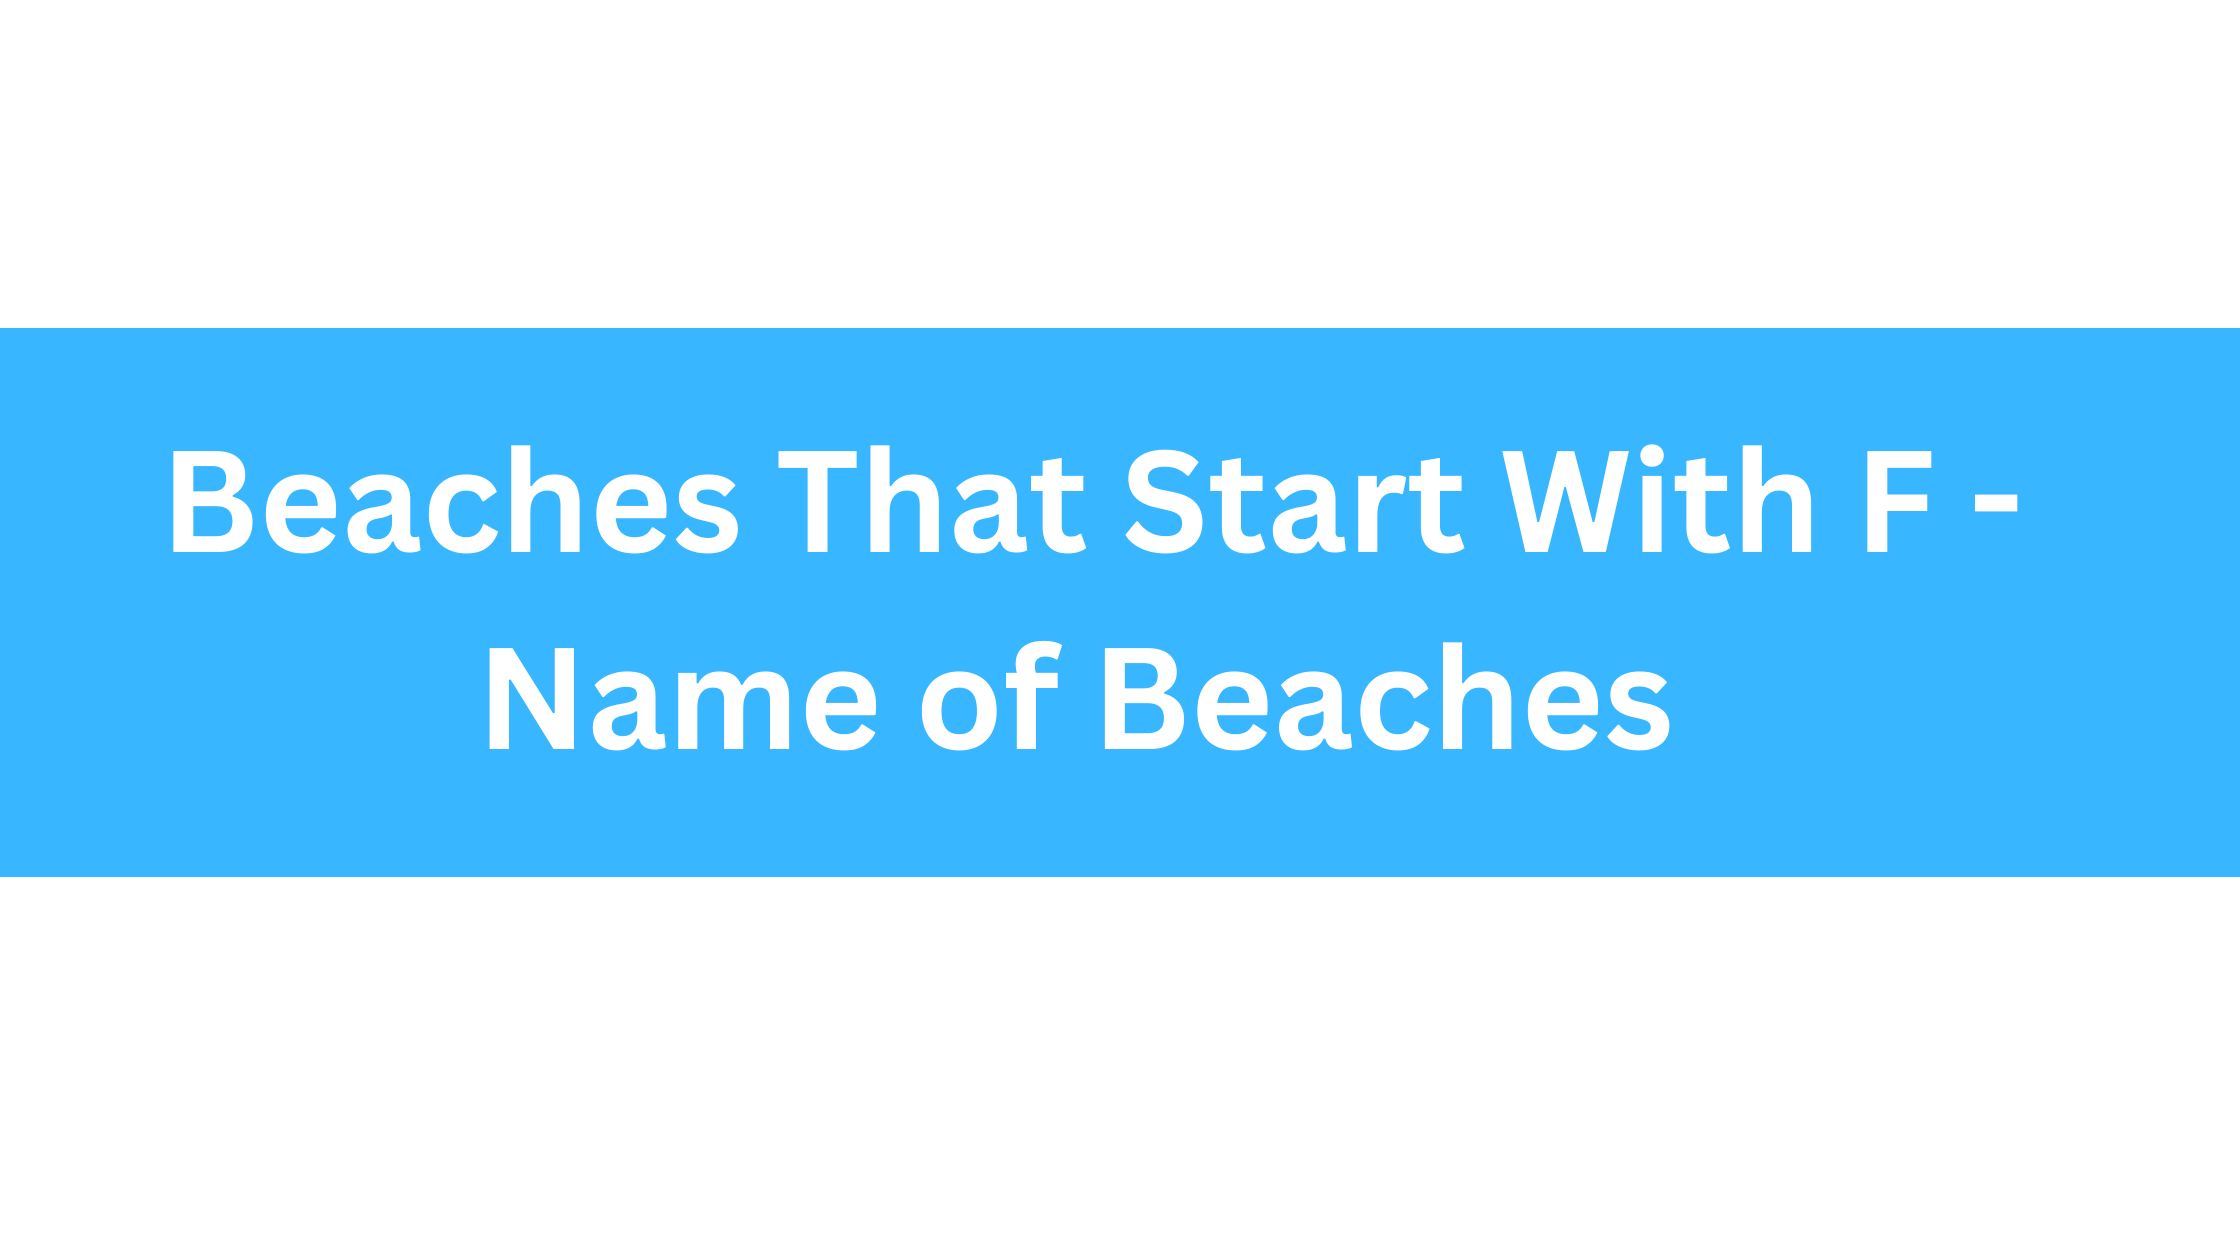 Beaches That Start With F